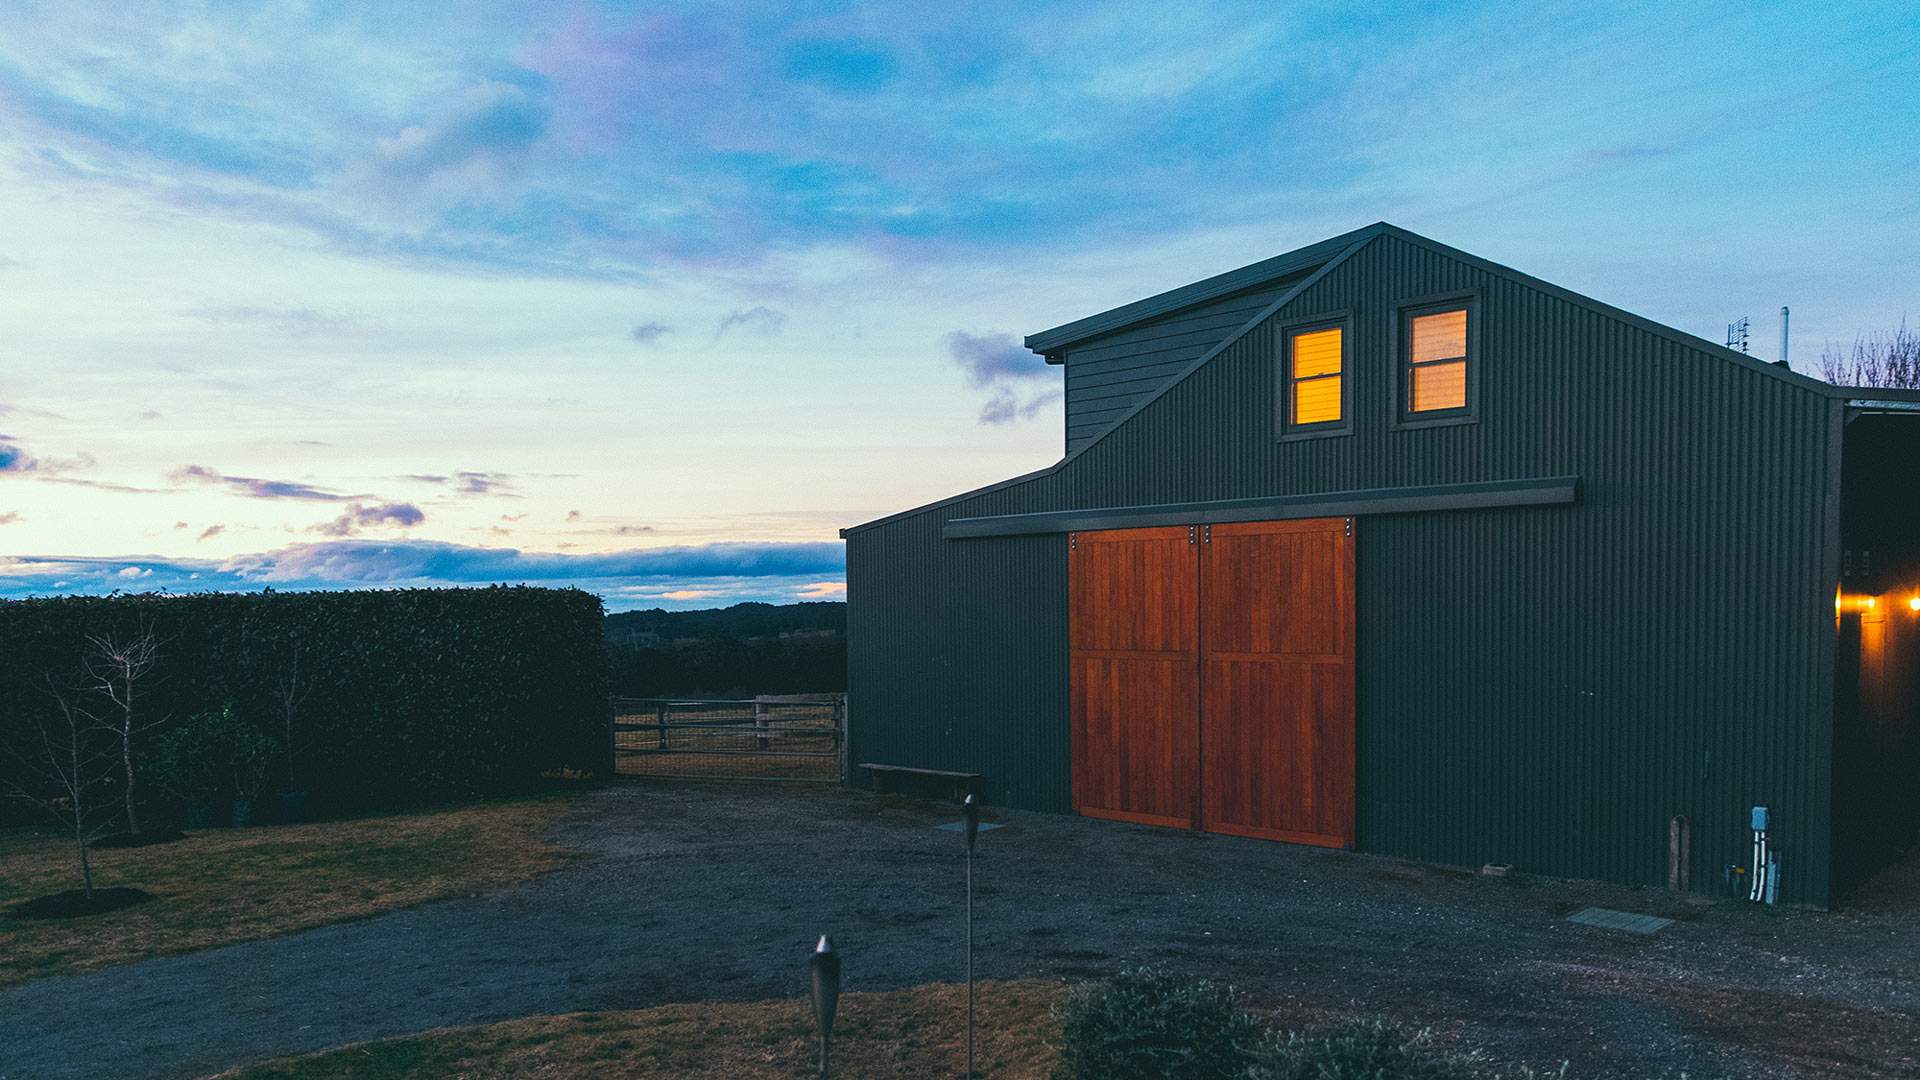 Barn Is NSW's New Out-of-Town Restaurant and Boutique Hotel from the Acclaimed Biota Team